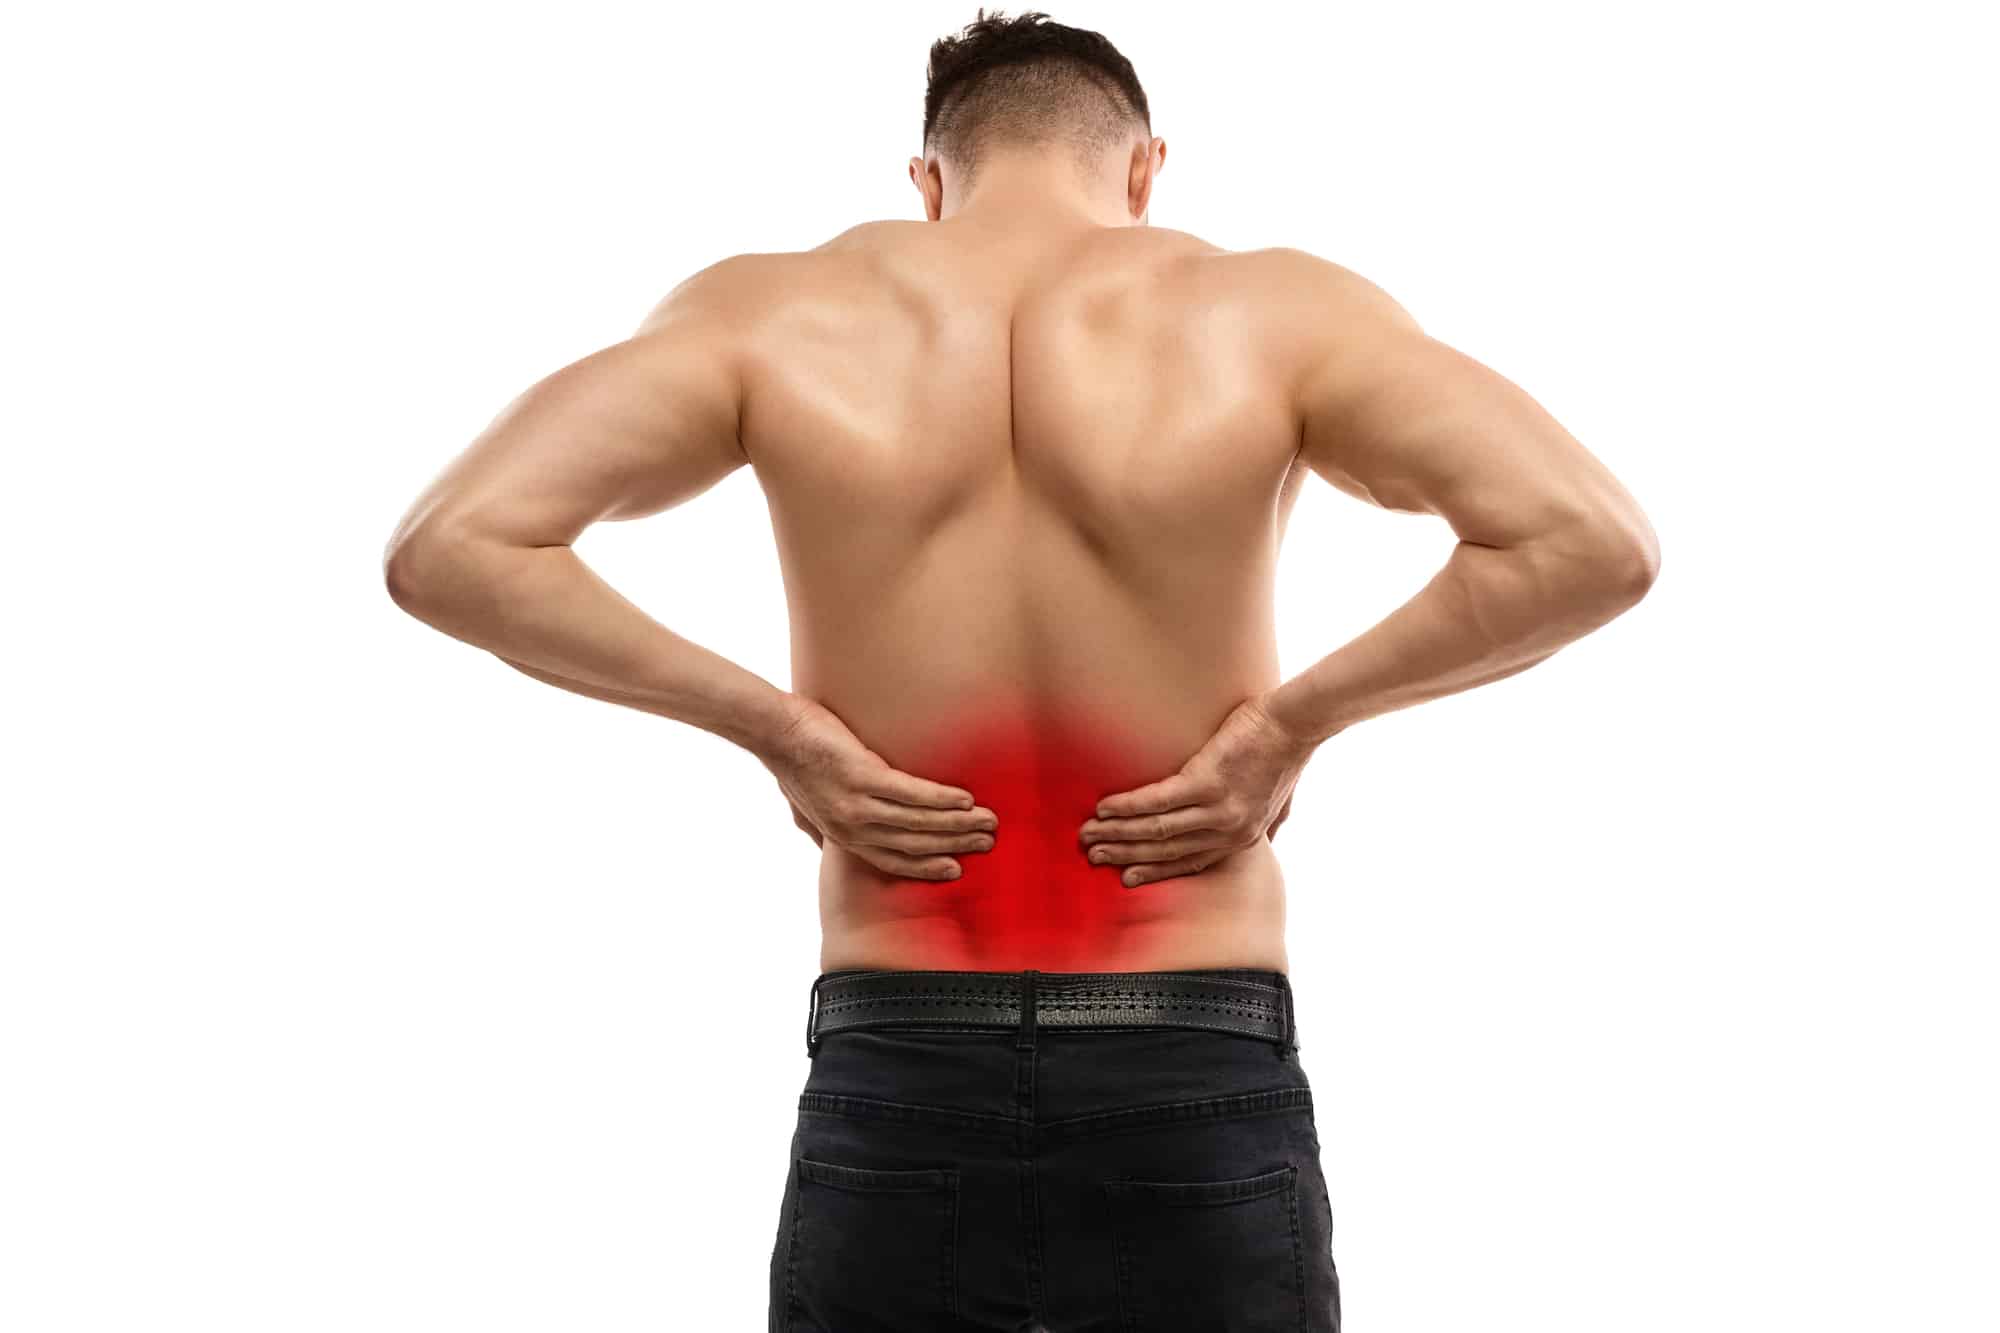 How Can I Get Help For My Tight Lower Back Muscles?